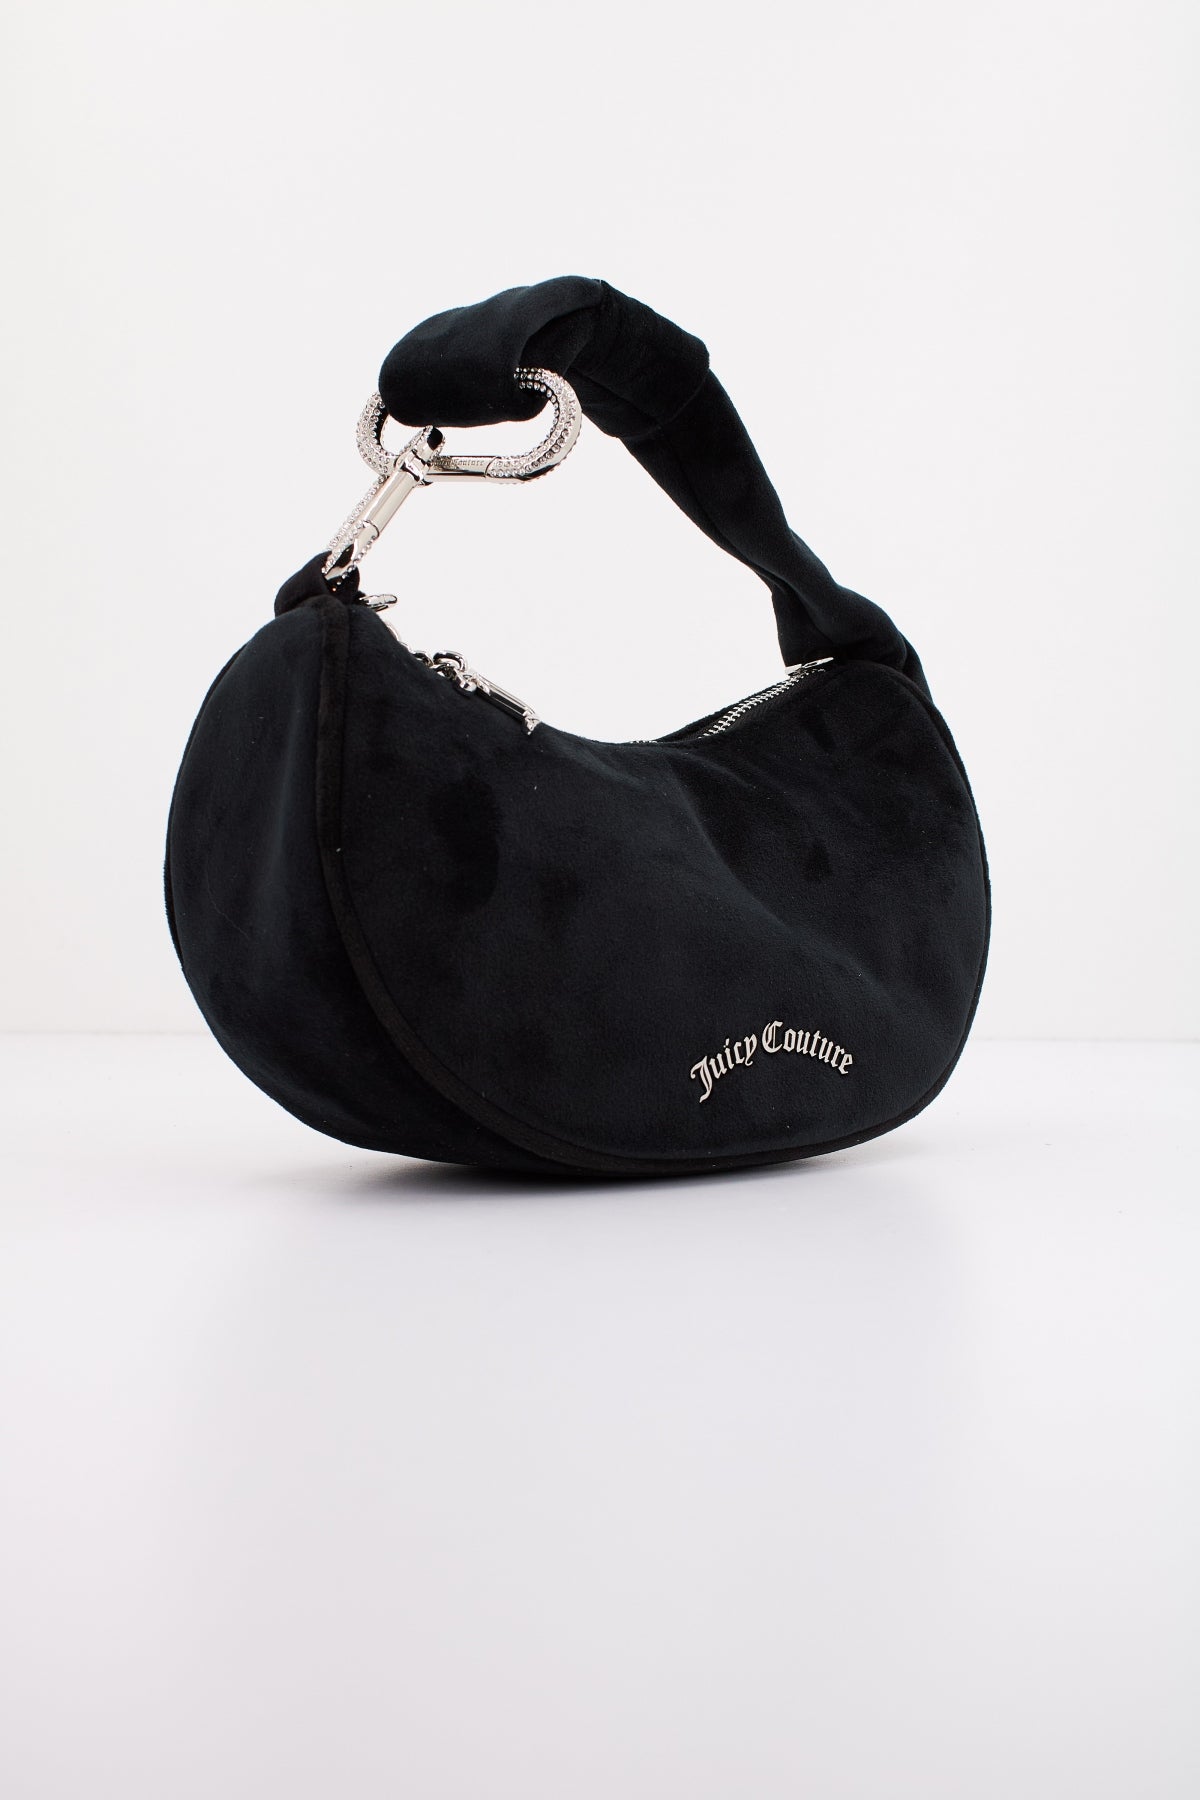 JUICY COUTURE BLOSSOM SMALL HOBO en color NEGRO  (1)